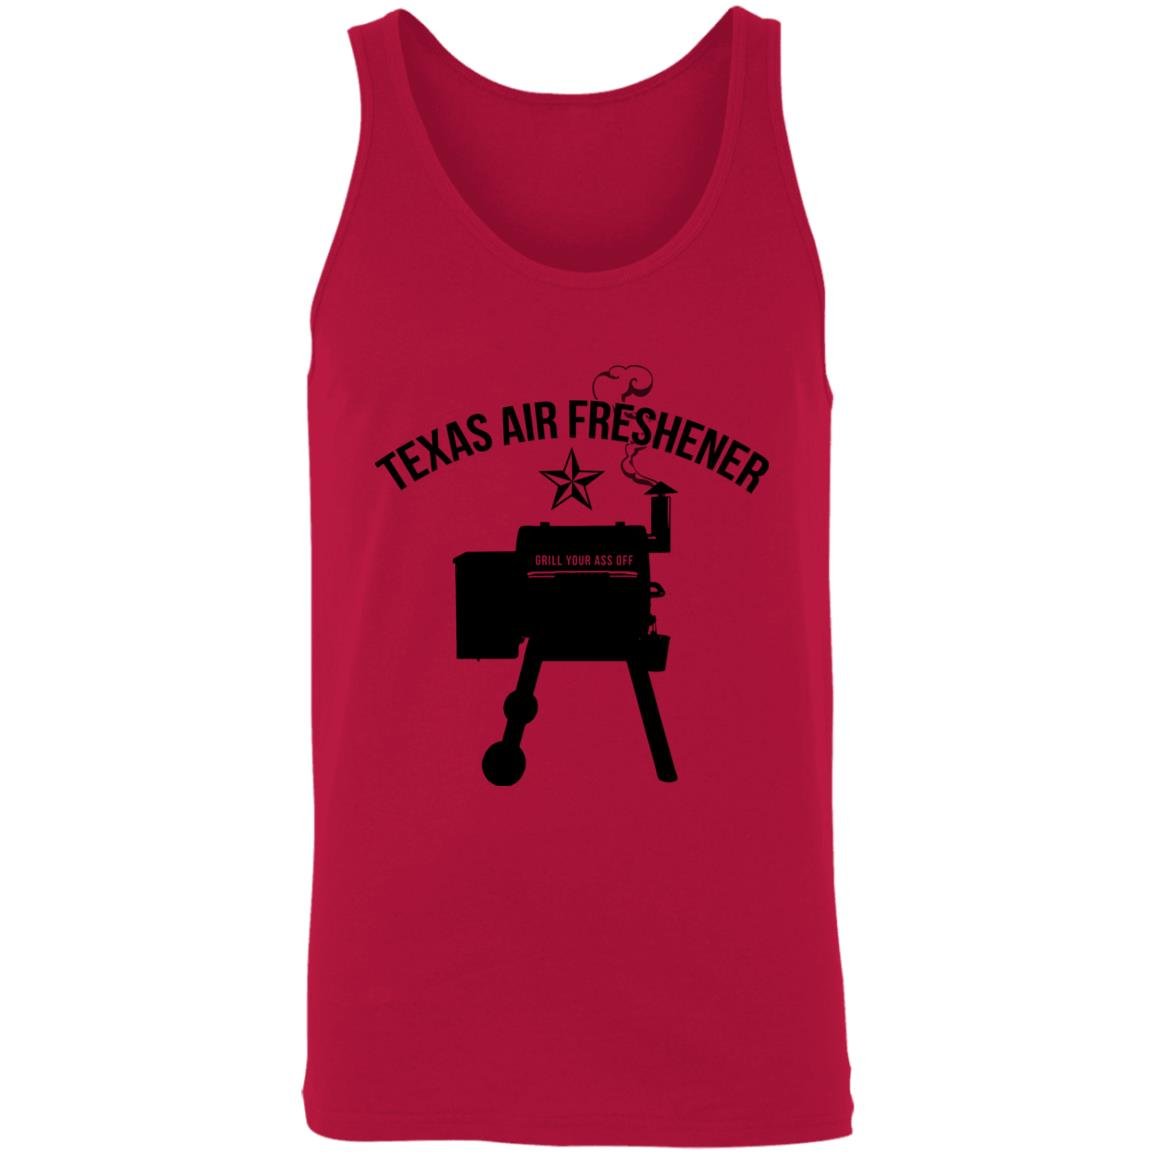 Texas Air Freshener - Grill Your Ass Off